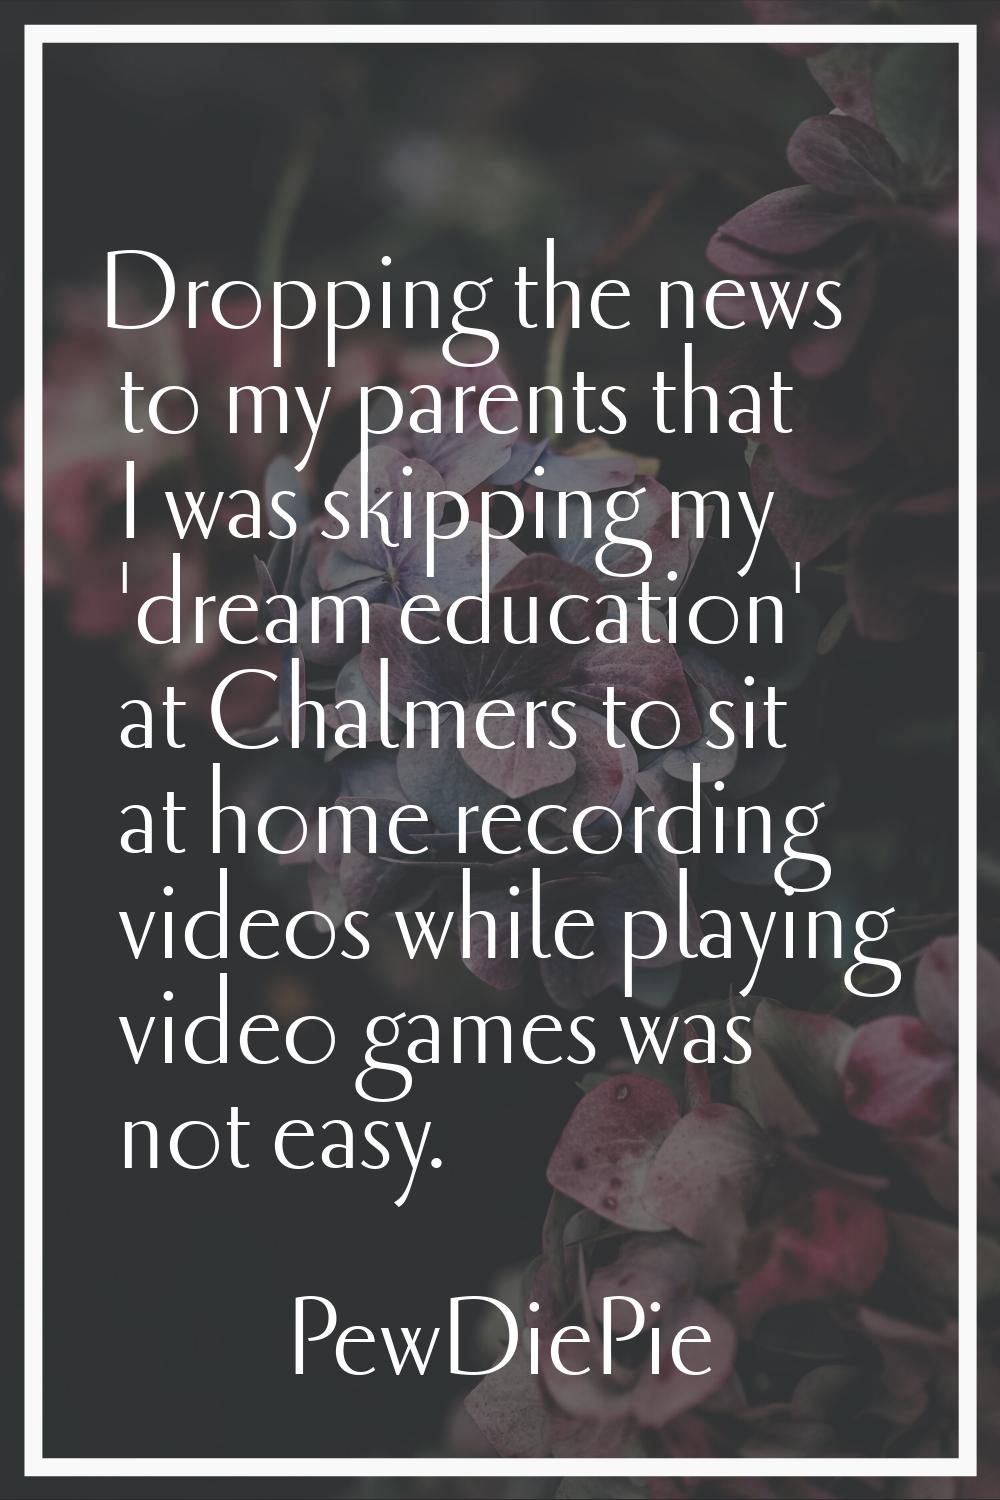 Dropping the news to my parents that I was skipping my 'dream education' at Chalmers to sit at home